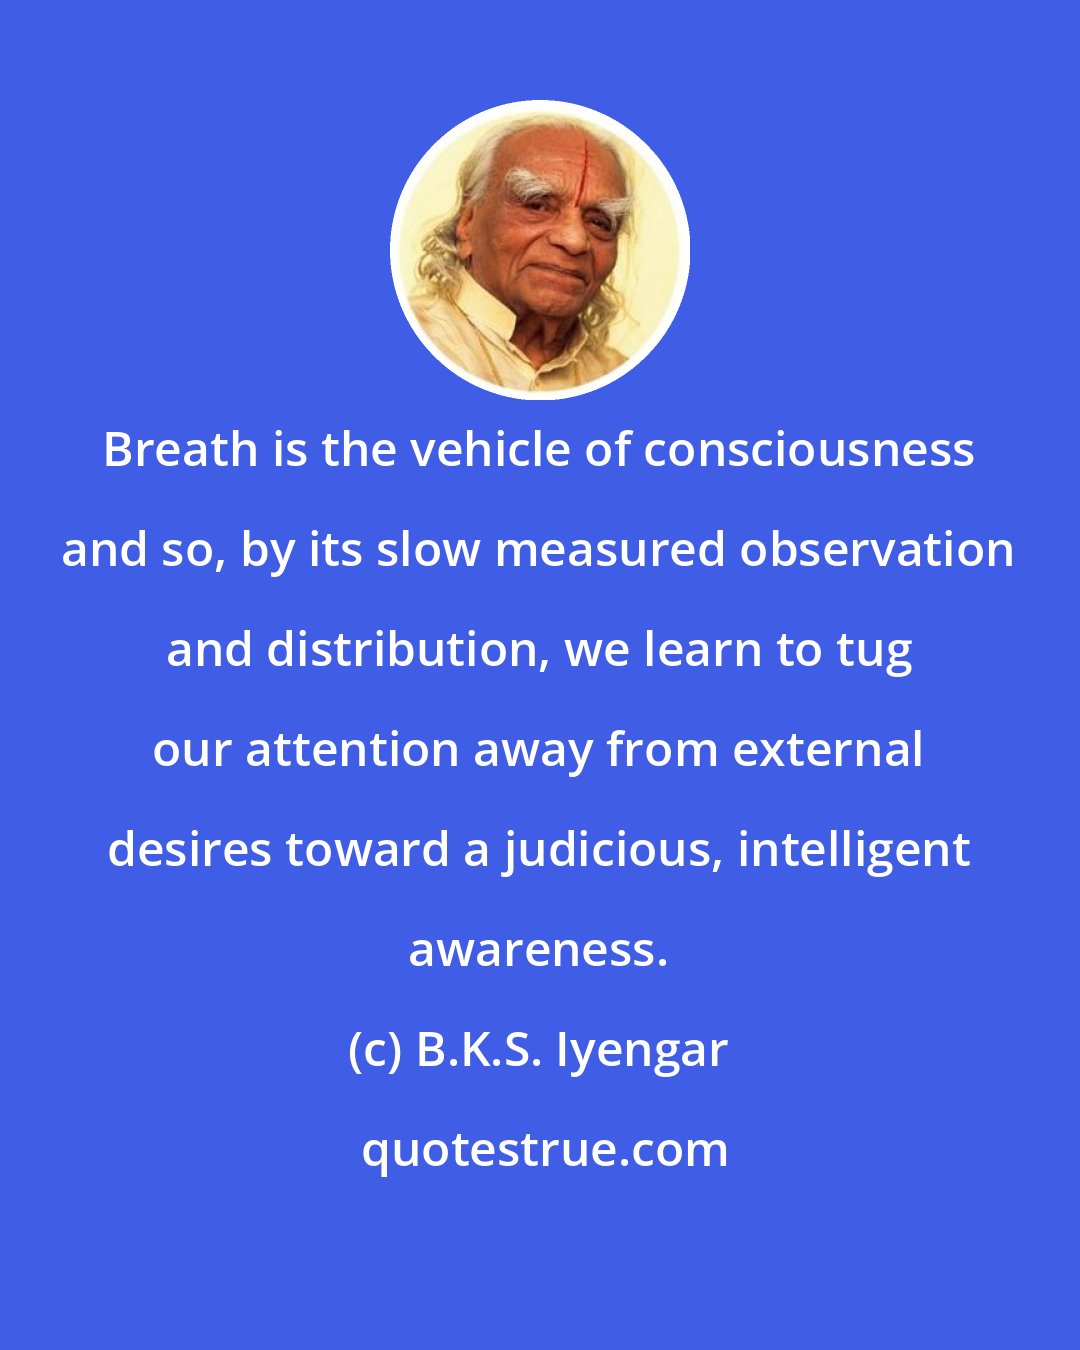 B.K.S. Iyengar: Breath is the vehicle of consciousness and so, by its slow measured observation and distribution, we learn to tug our attention away from external desires toward a judicious, intelligent awareness.